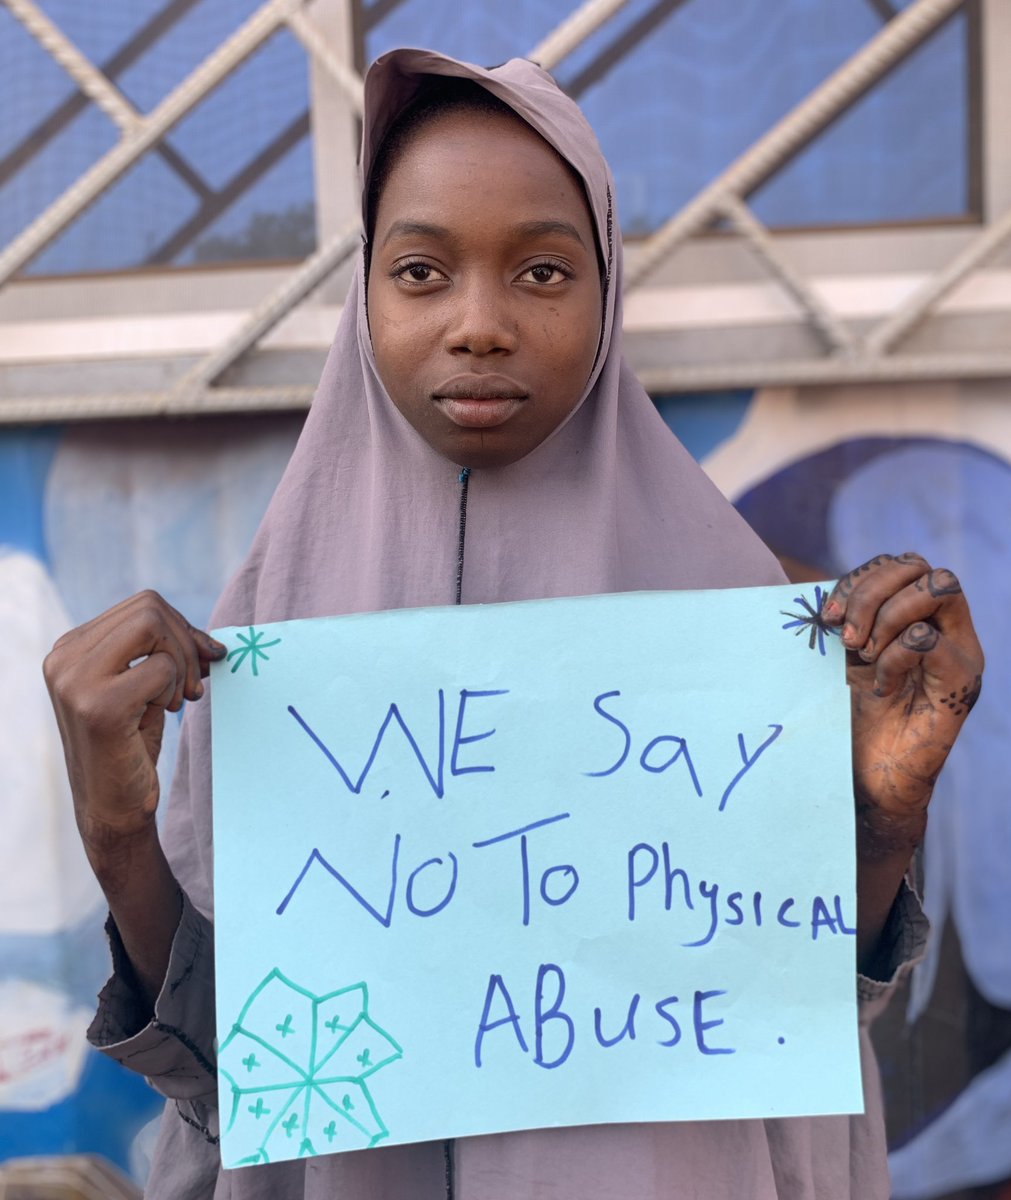 Physical abuse is never acceptable. It's essential to say NO to it, to stand up against it, and to seek help and support if you or someone you know is experiencing it.
 Everyone deserves to feel safe and respected in all situations🙌
SAY NO TO ABUSE❌
#endgbv #endabuse